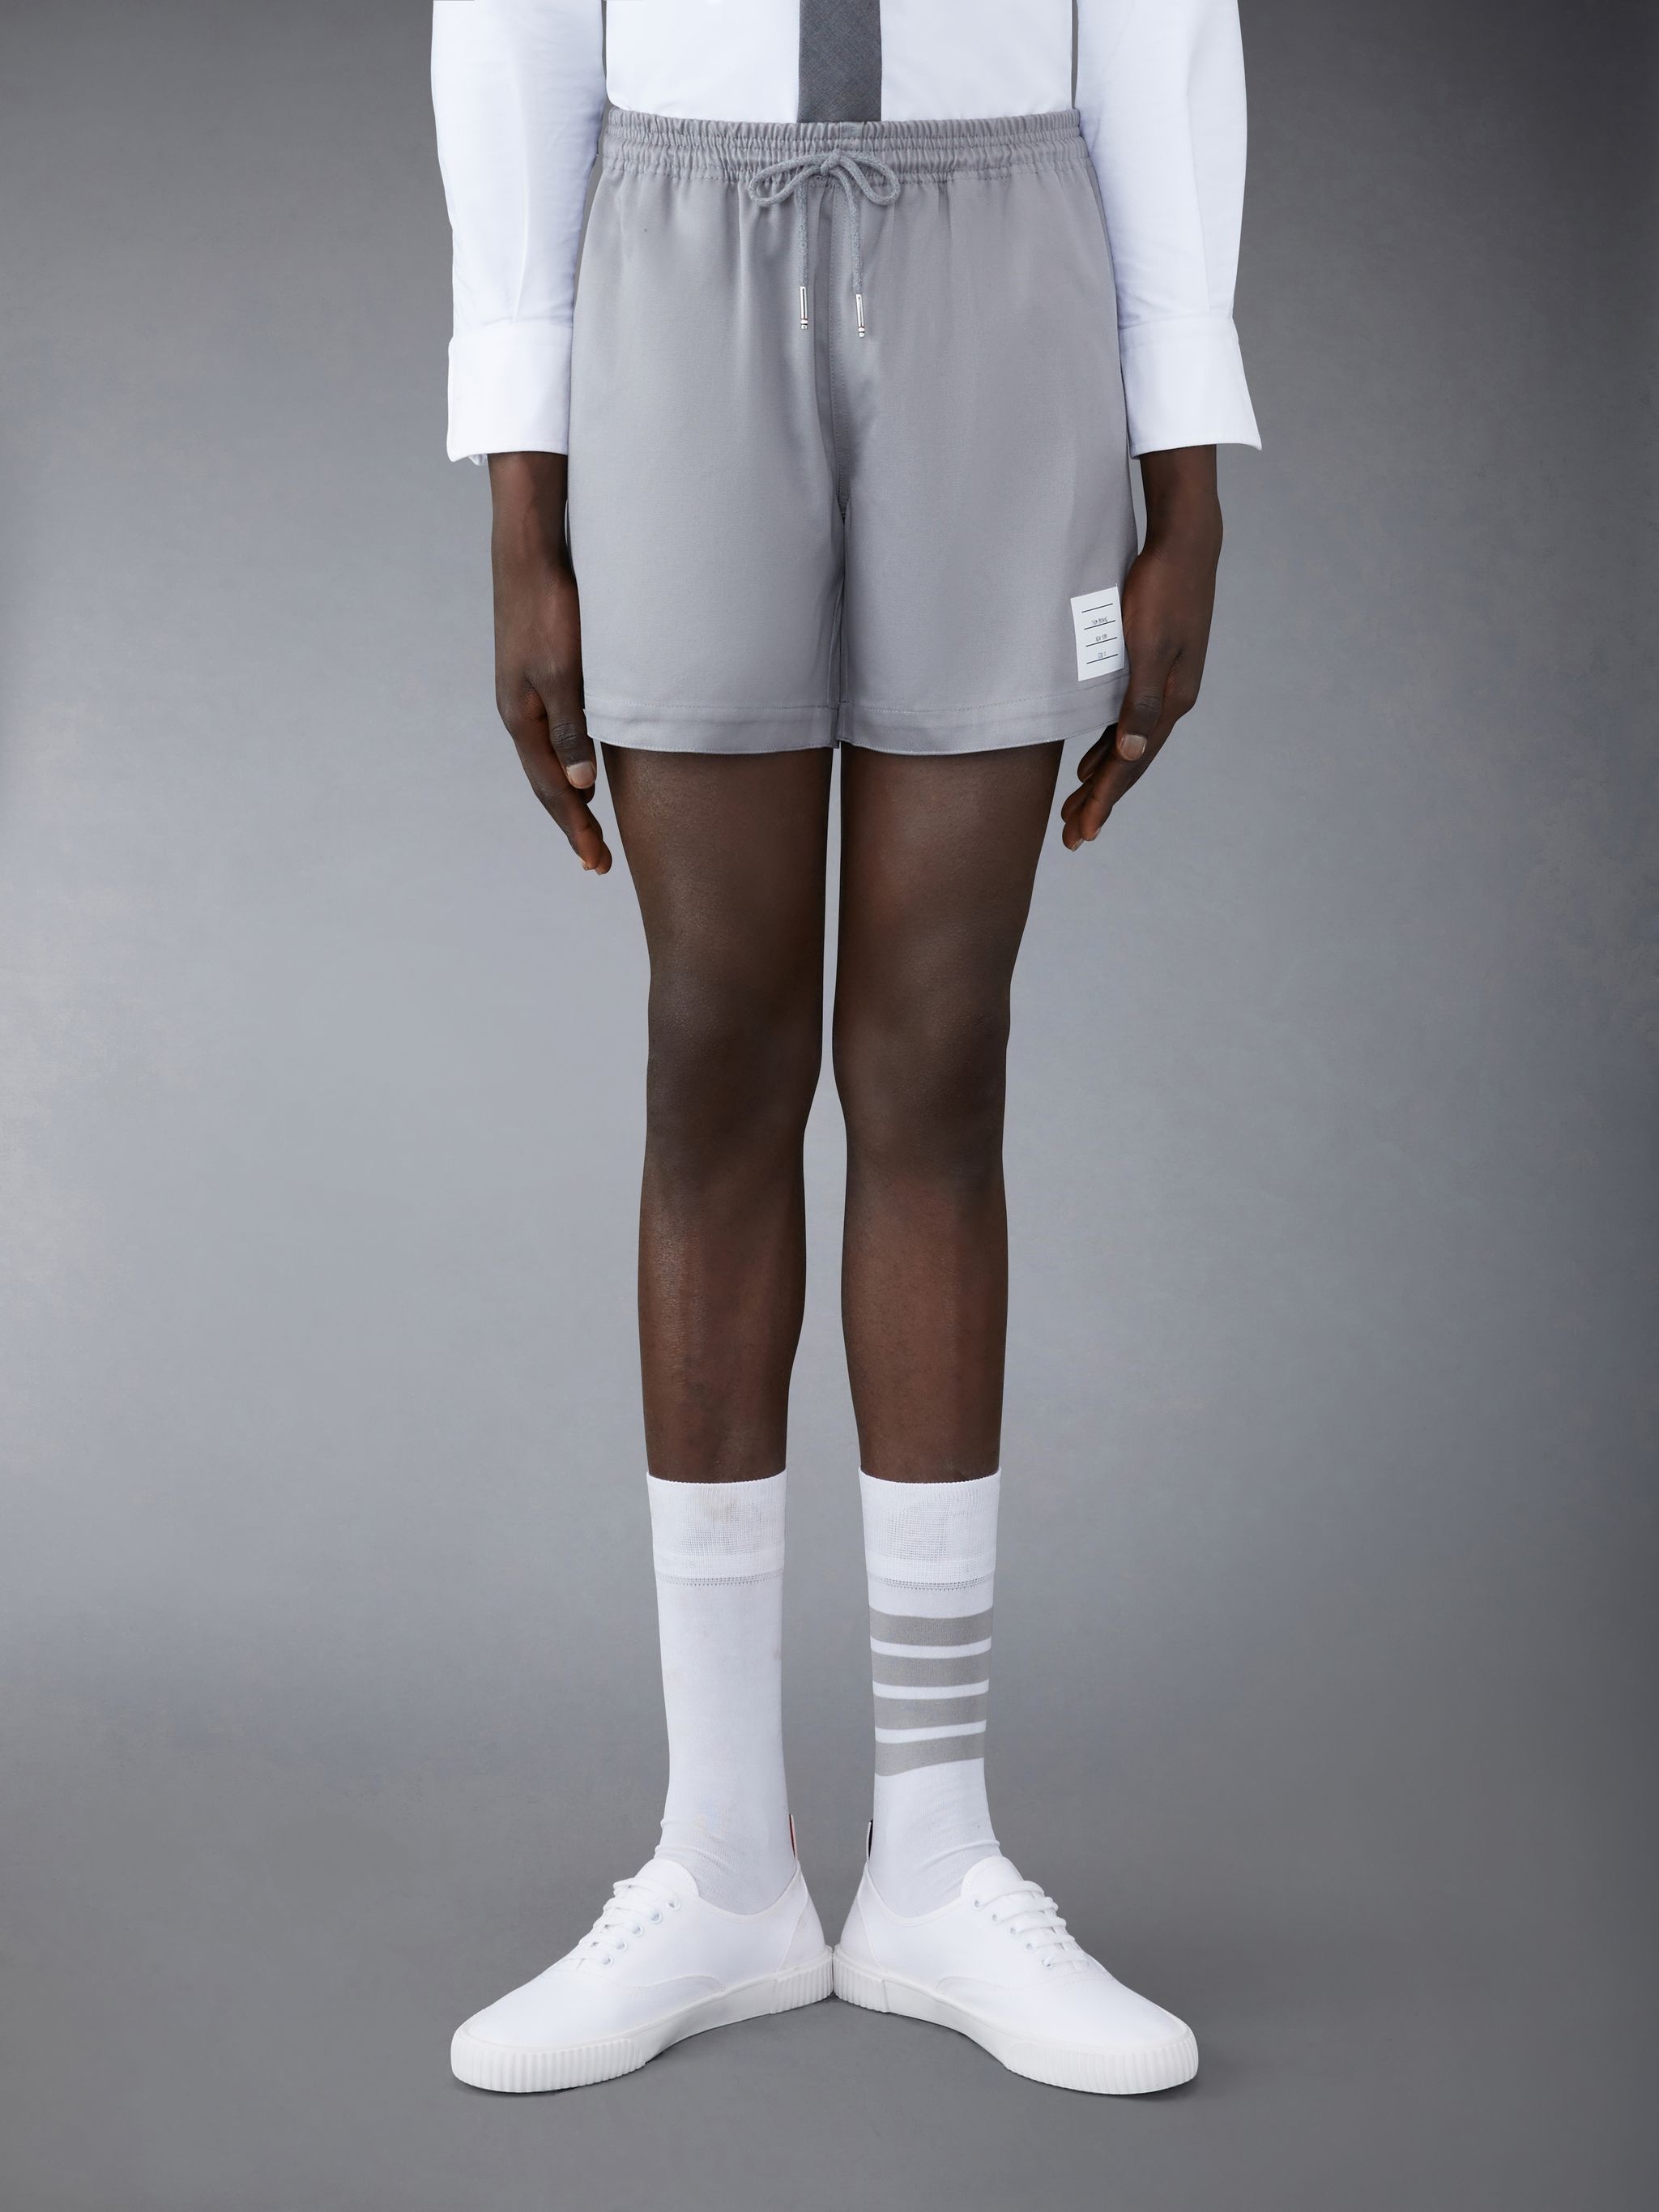 RUGBY SHORTS W/ DRAWCORD WAISTBAND IN COTTON TWILL - 1